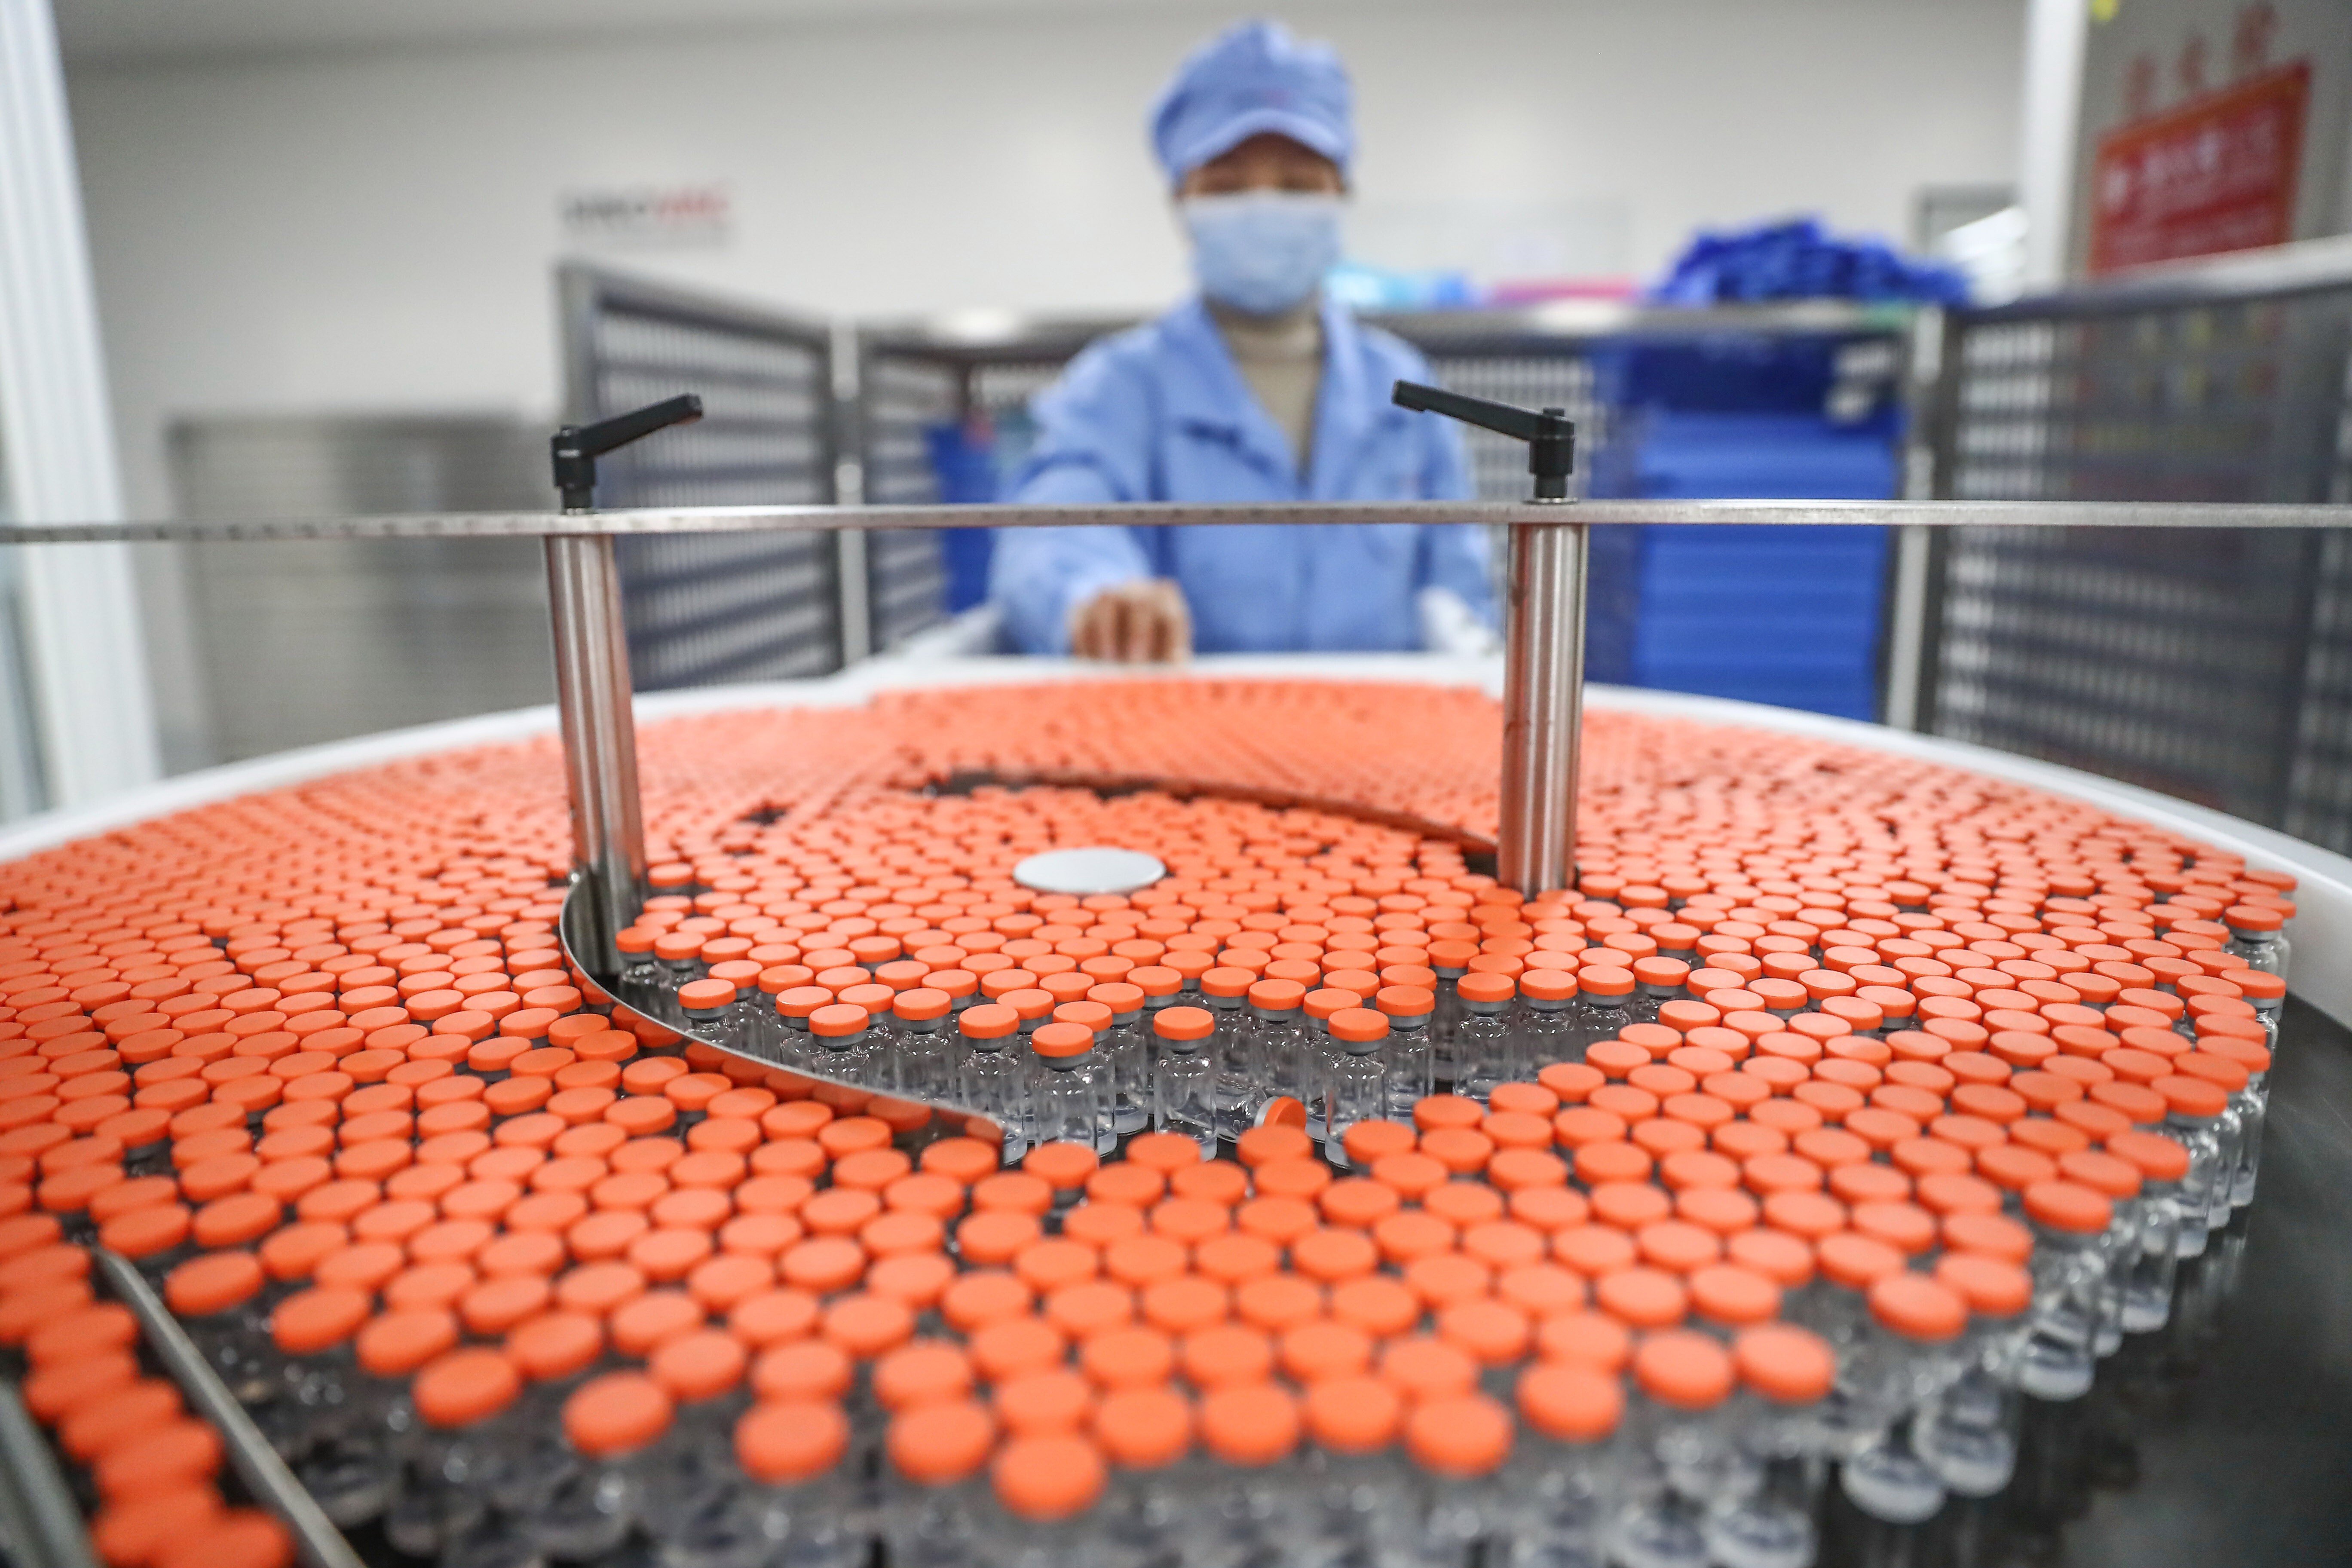 An employee of Sinovac Research and Development at work on January 6 in the company’s Covid-19 vaccine packaging plant in Beijing. Photo: Xinhua